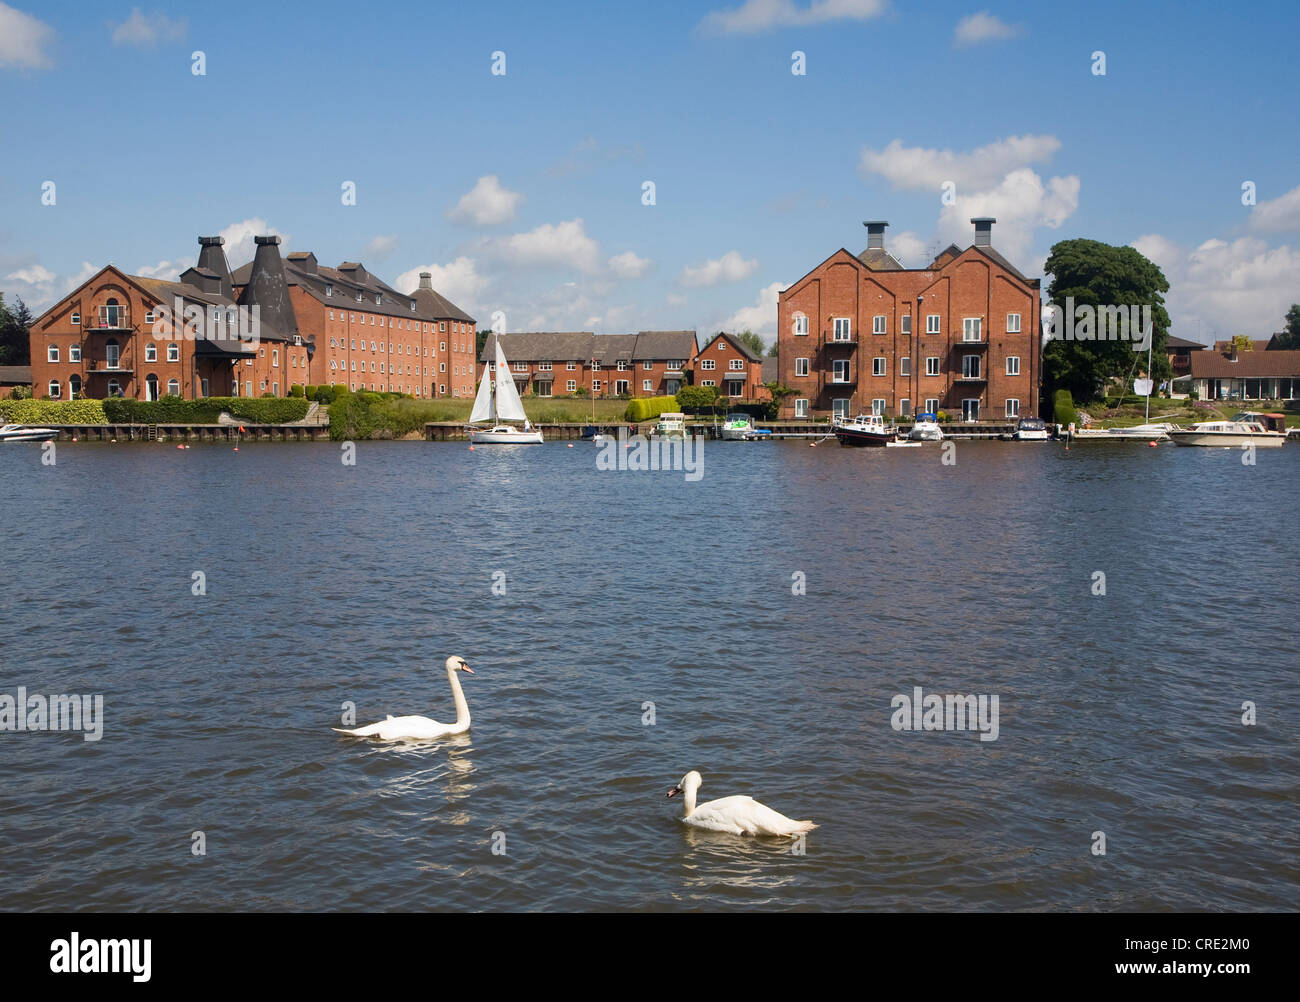 Boats and swans on the water at Oulton Broad, Suffolk, England Stock Photo